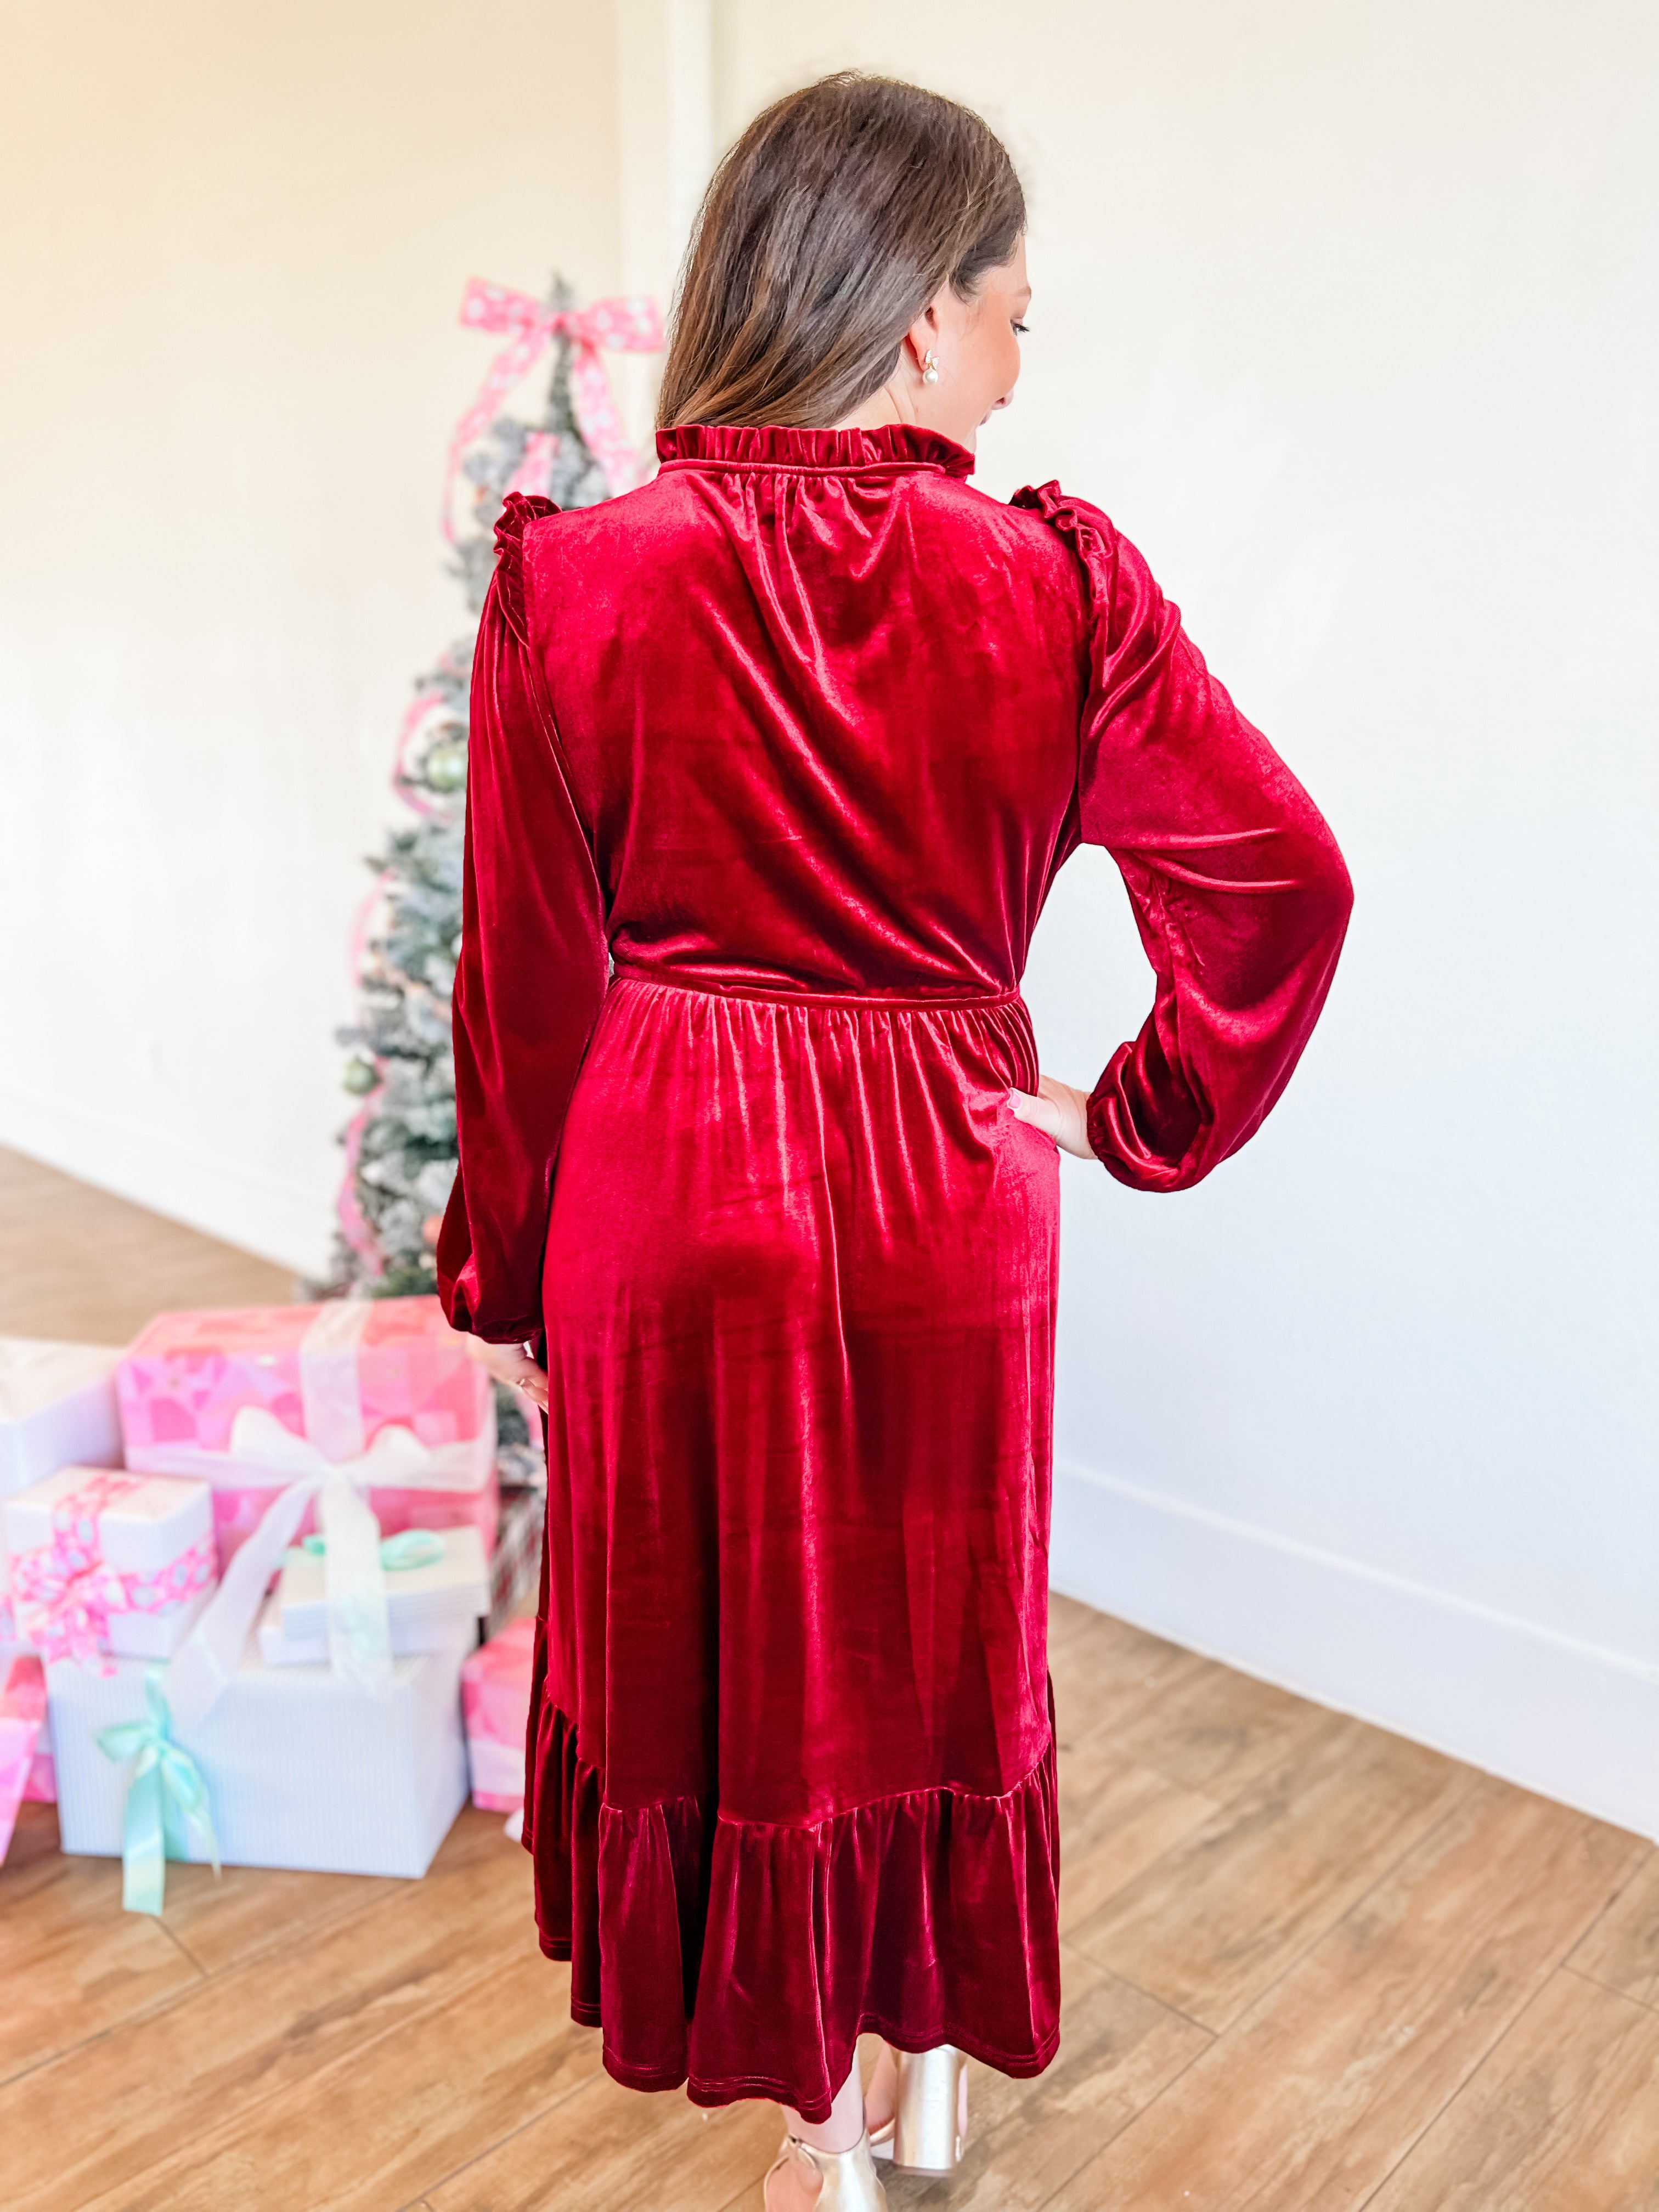 The Most Wonderful Time of the Year Dress